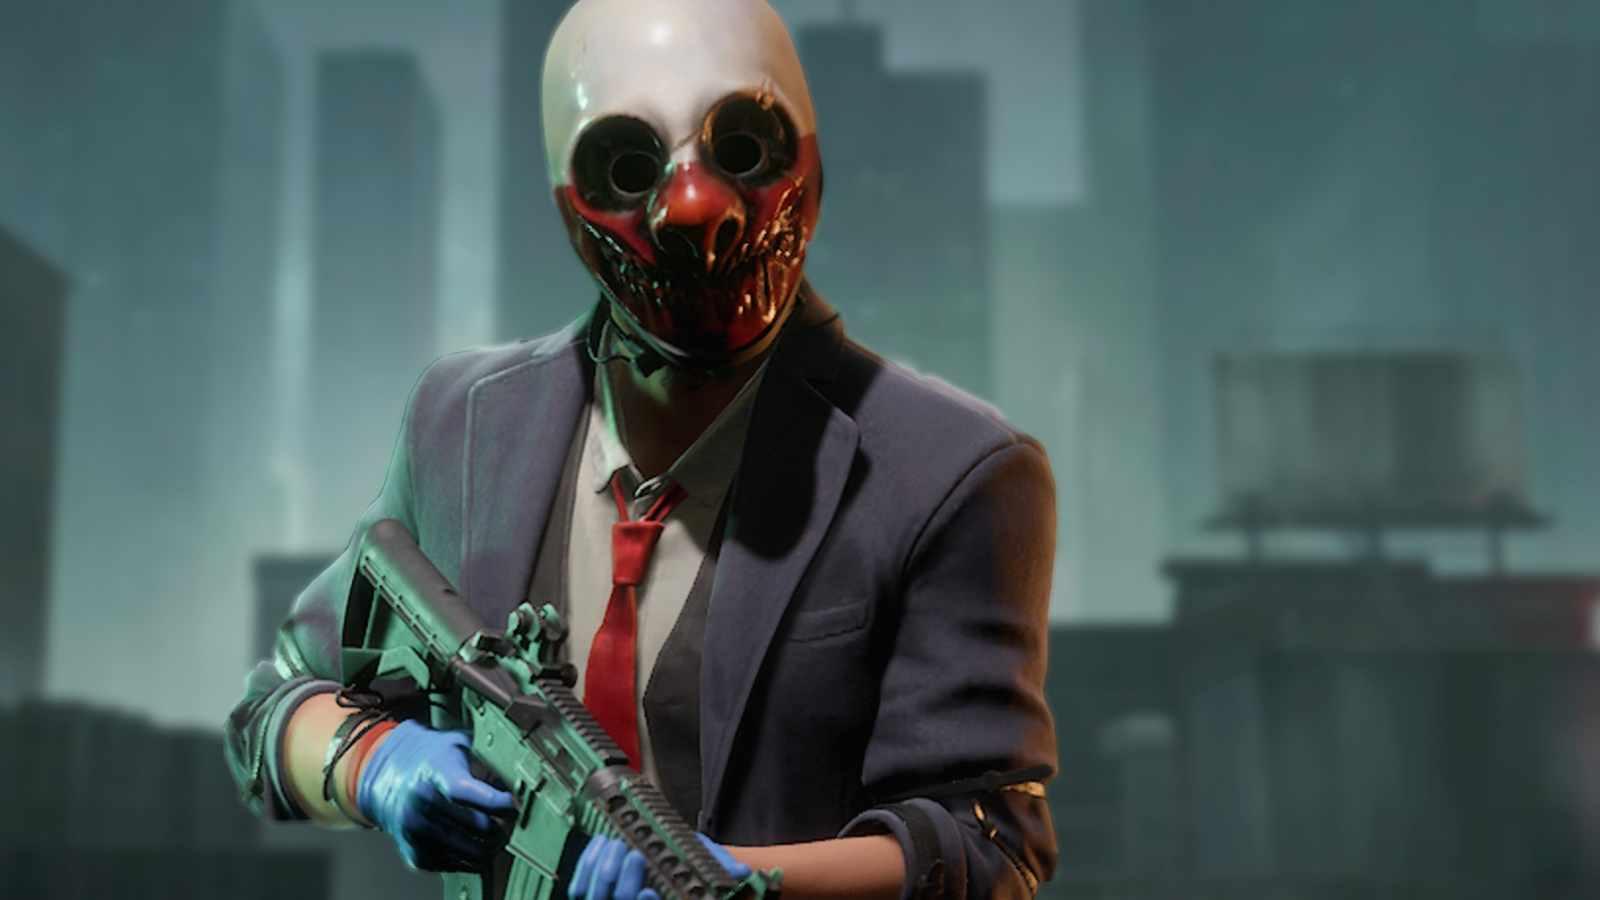 PAYDAY 3 NEWS DROP: CROSSPLAY CONFIRMED, MORE